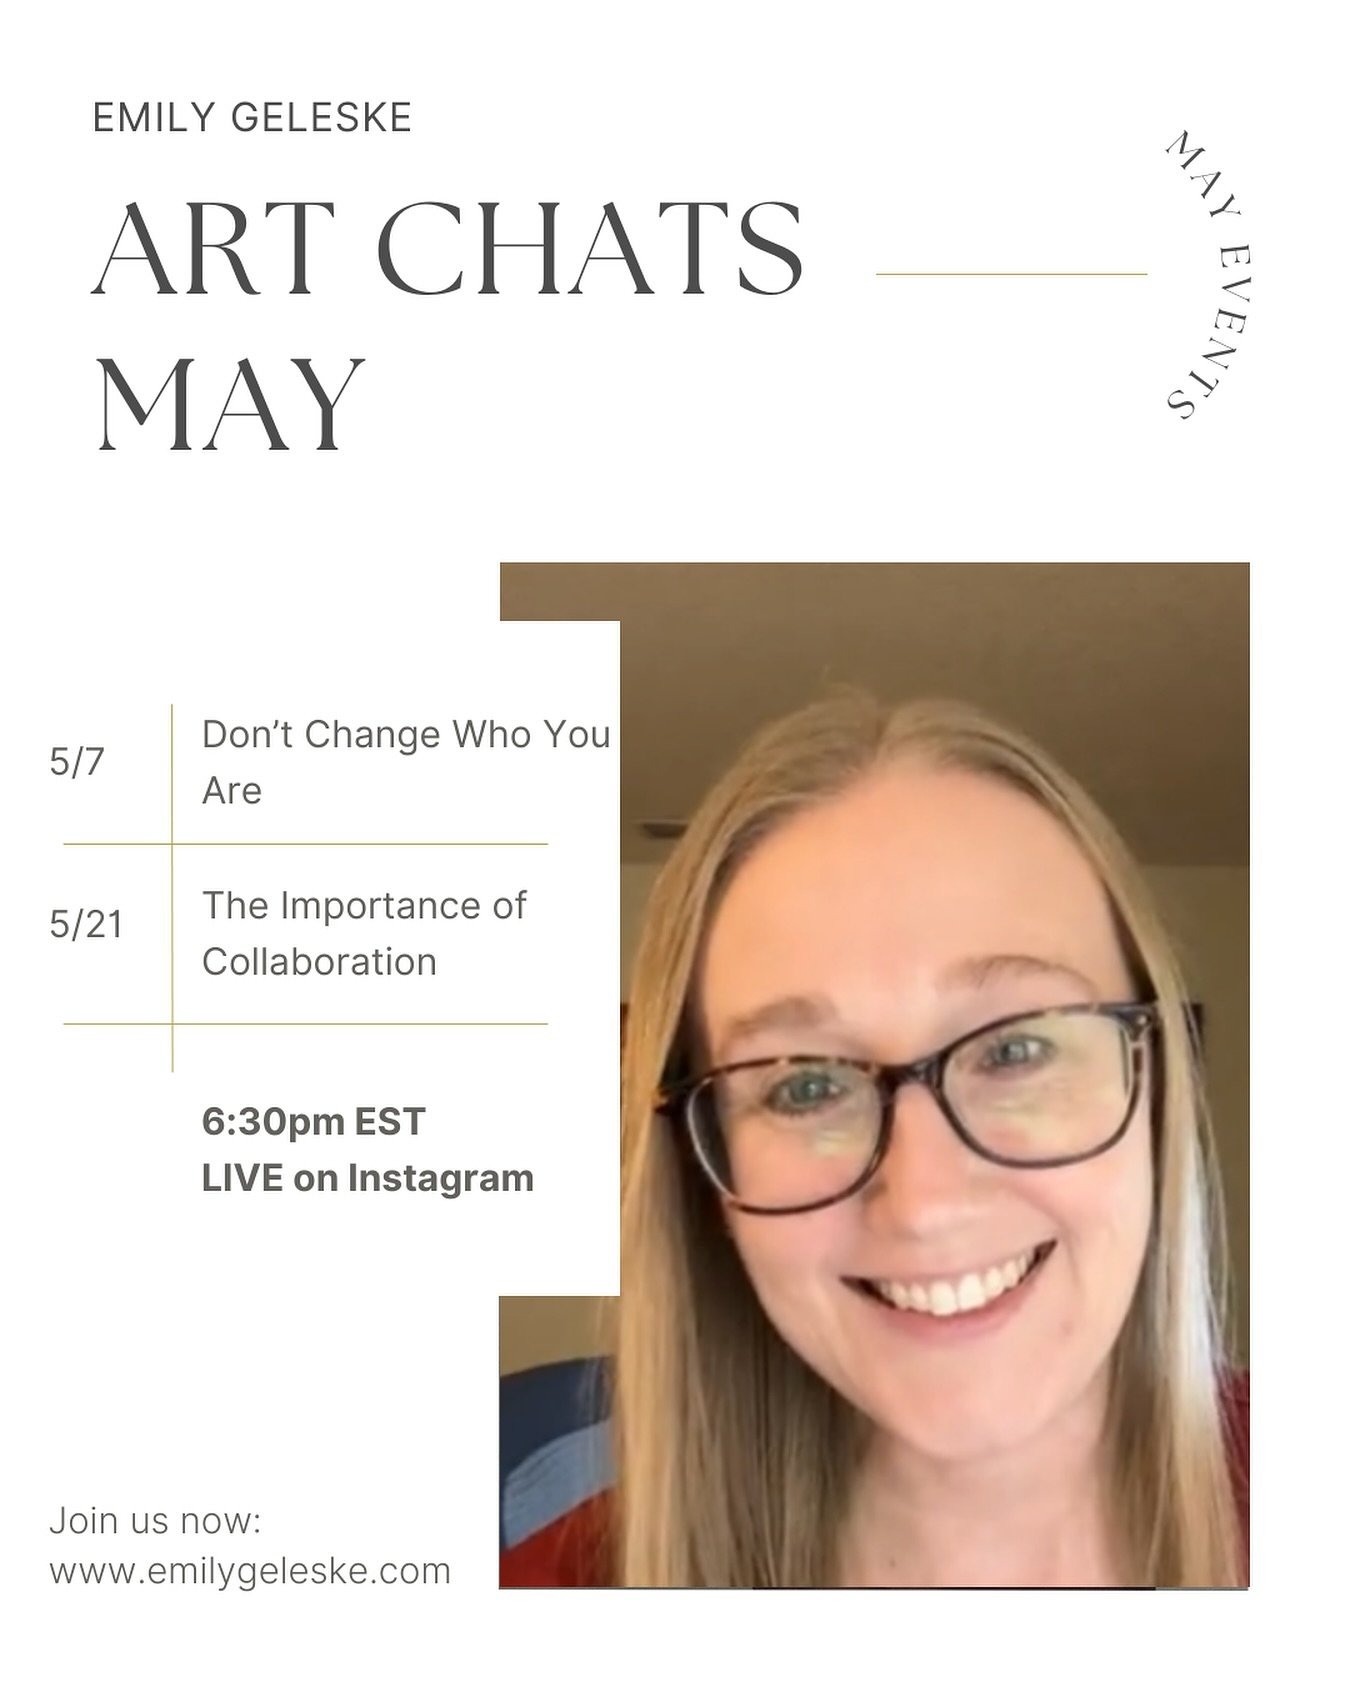 Have you wanted to catch a live Art Chat episode instead of watching the replay? Here is the schedule for May. I look forward to seeing you there!